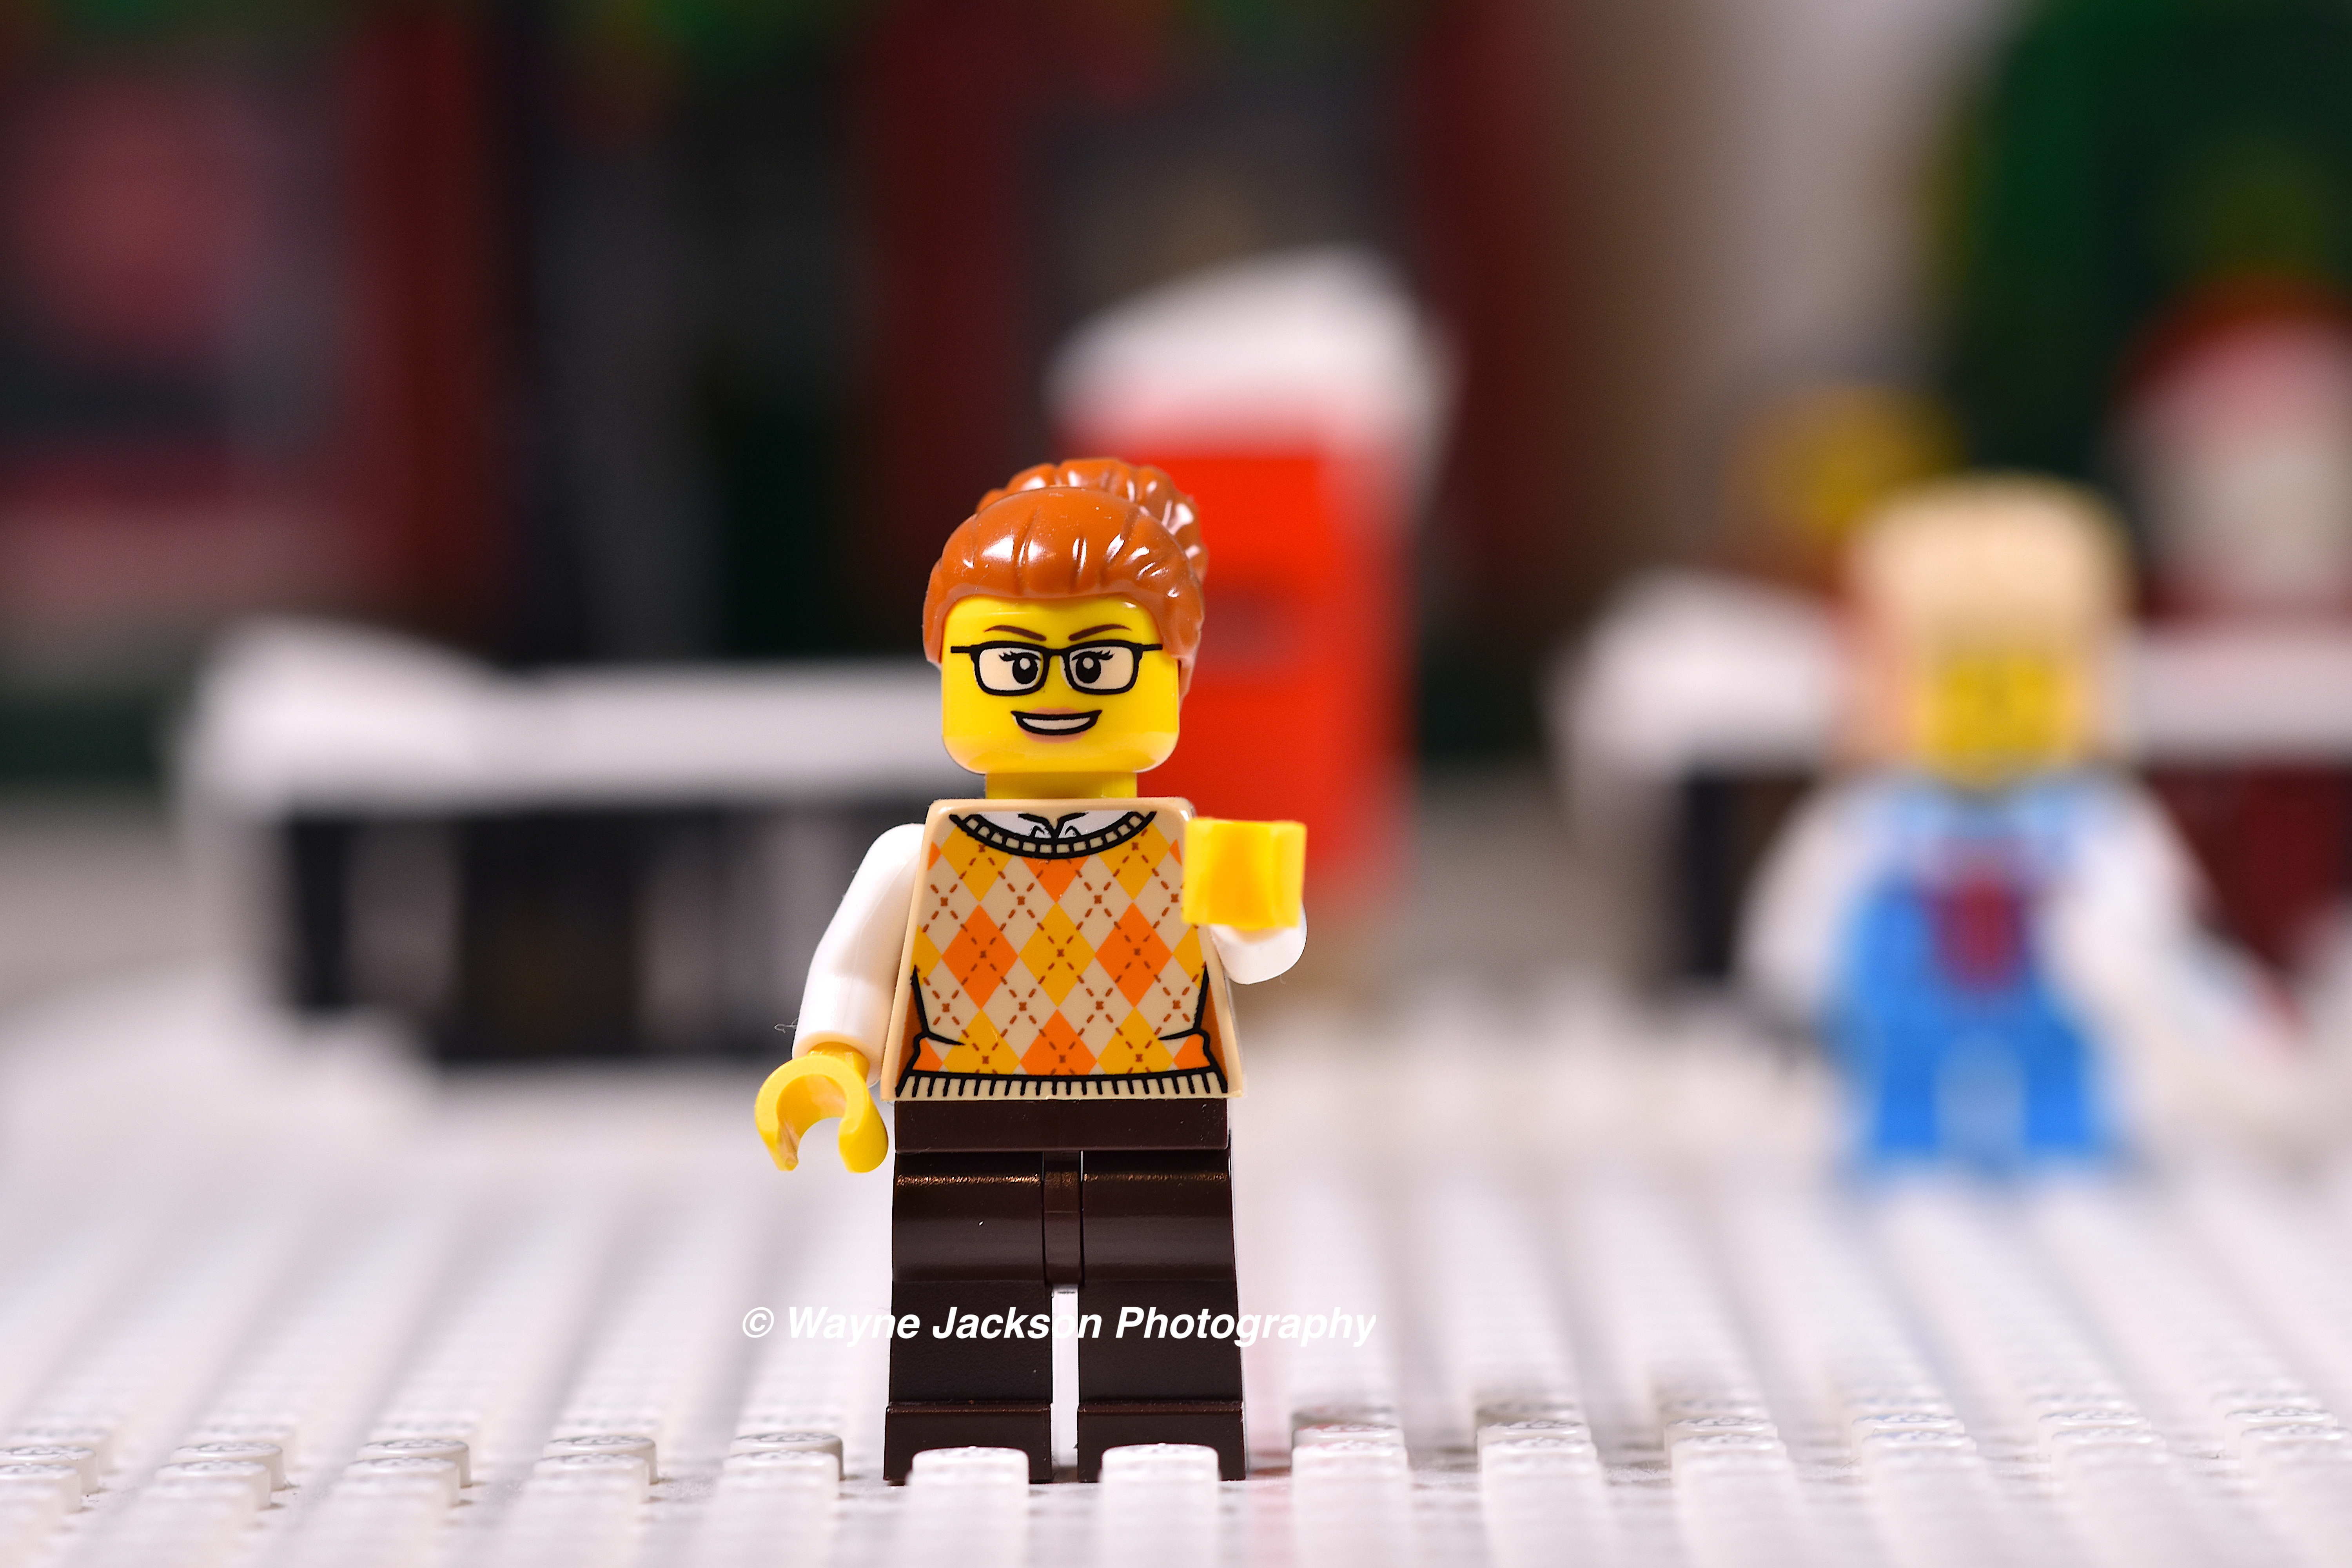 Shopkeeper from Lego Christmas Holiday Main Street (Santa's Toys and Games)